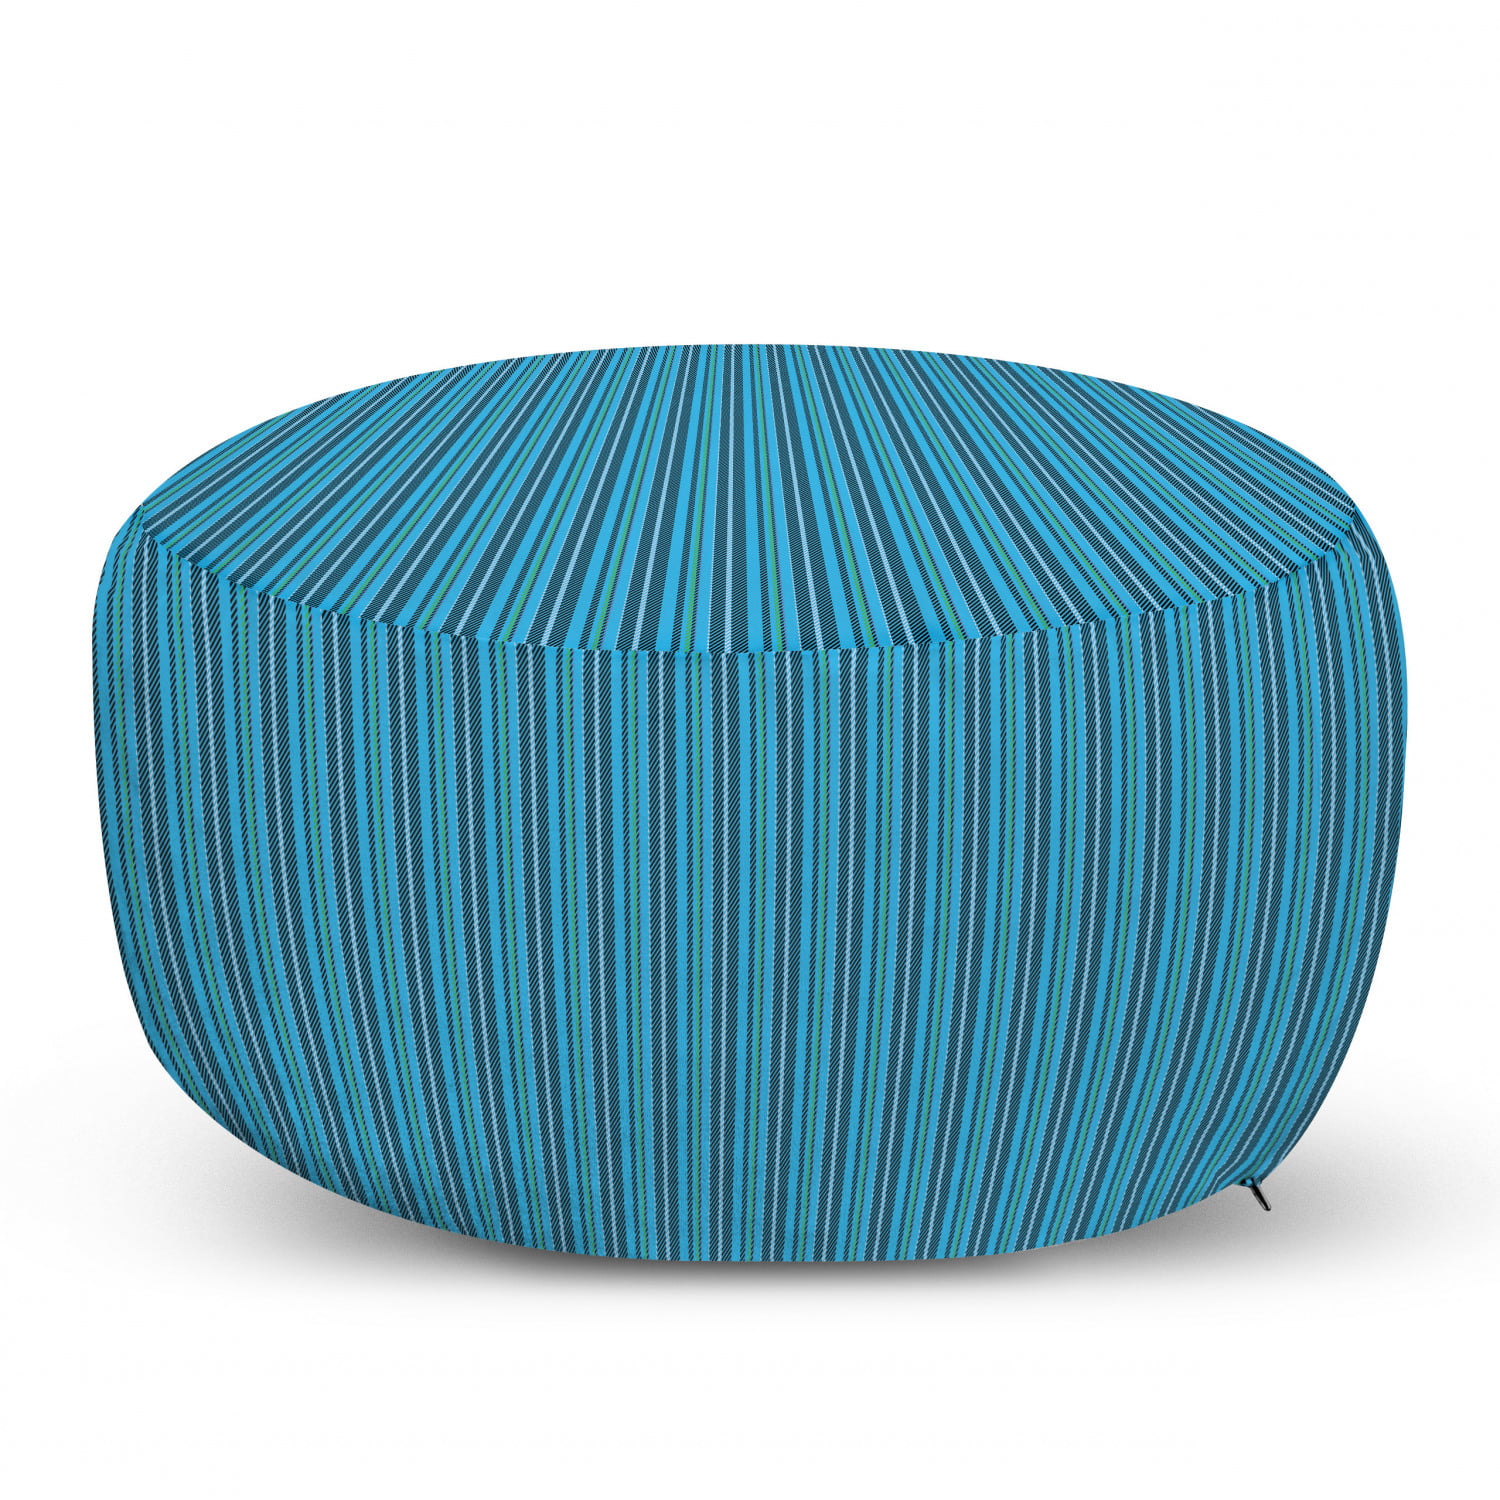 Under Desk Foot Stool for Living Room Office Ottoman with Cover Abstract Ocean Inspired Palette Lines Geometrical Image Turquoise Pale Blue Ambesonne Aqua Rectangle Pouf 25